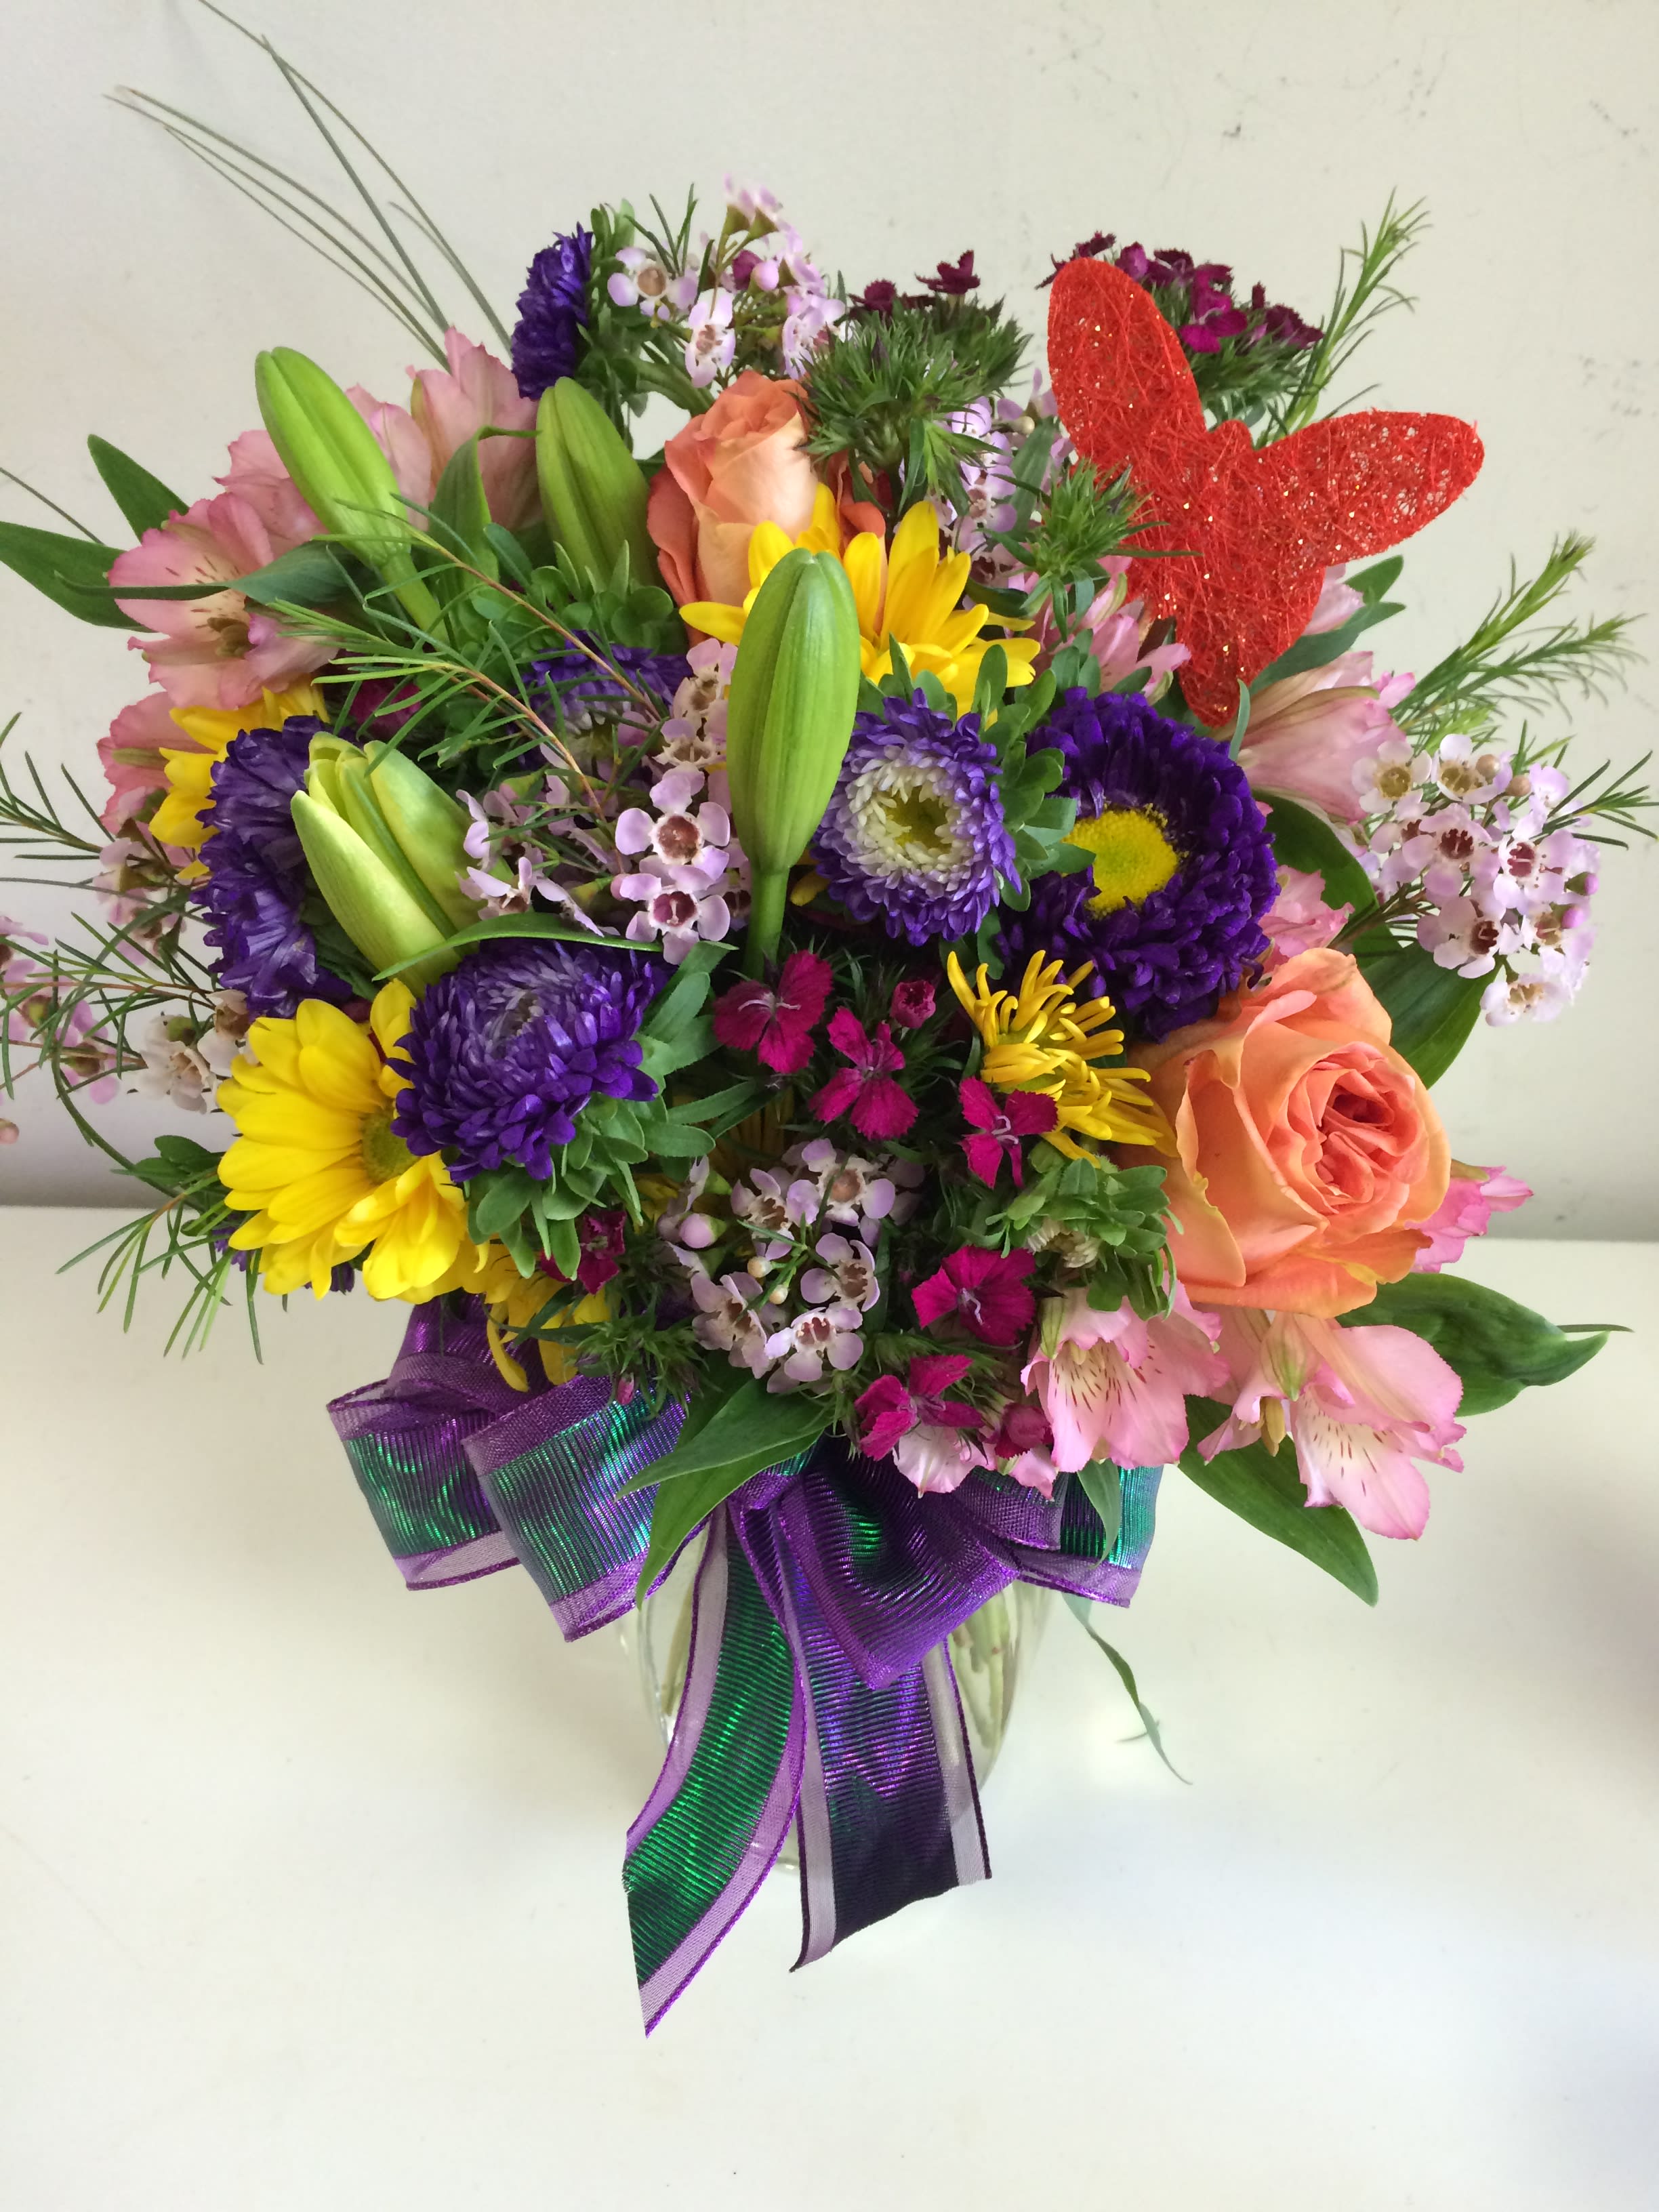 Fresh Mix - Let our designer choose the freshest flowers for a mix of beauty